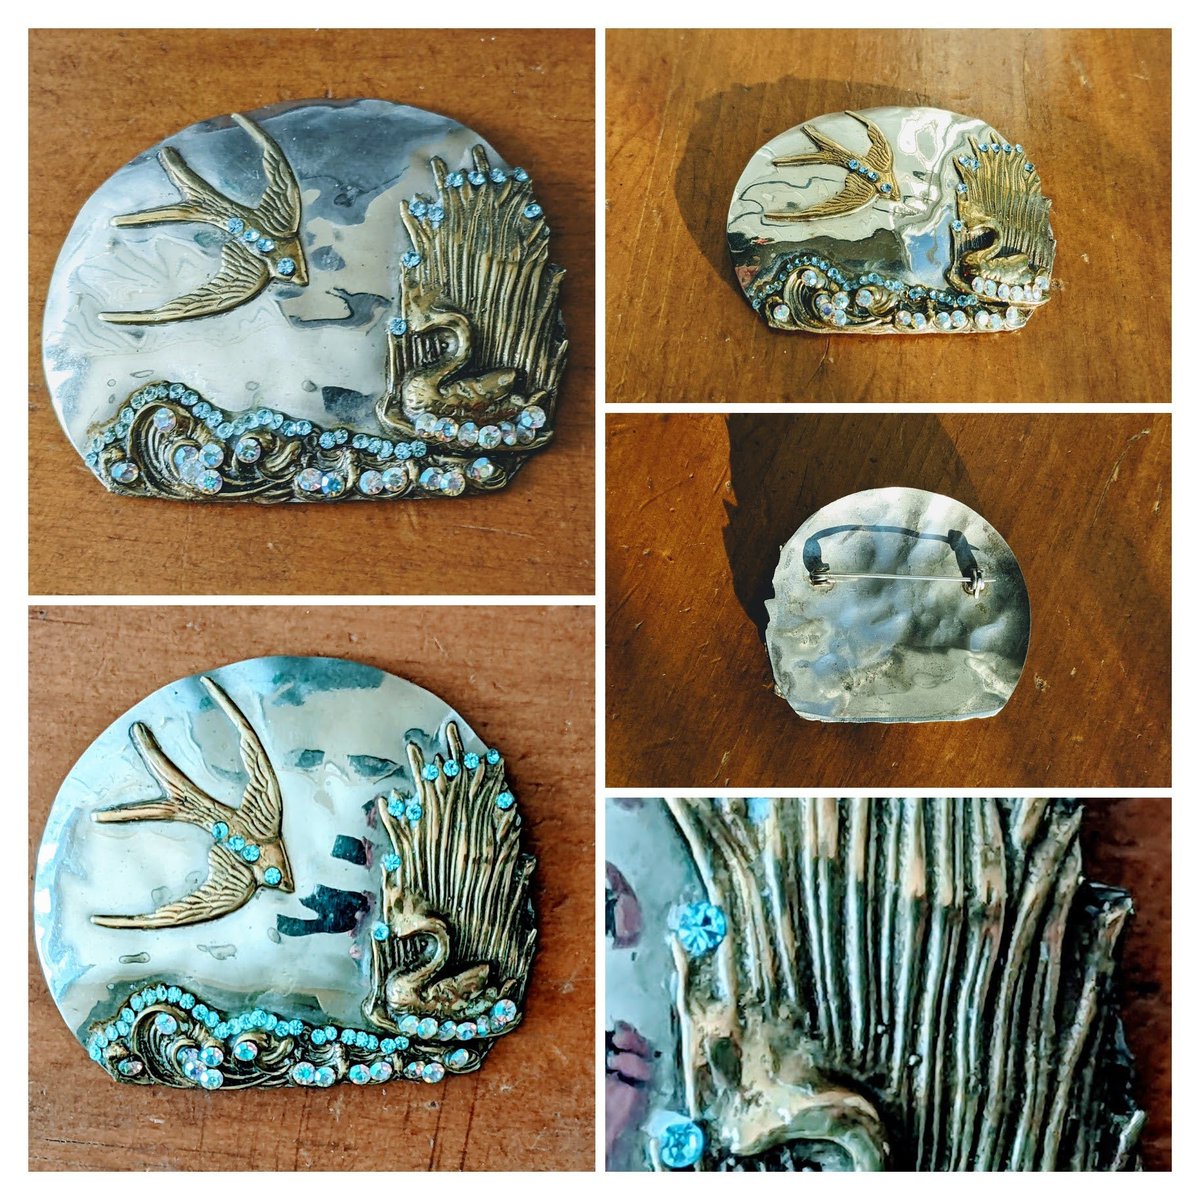 Such a beautiful pin in so many ways.  The scene, the brass and silver coloring, combined with the rhinestones...really just brooch perfection and just in at whimsicalvintage.etsy.com #etsyshop #etsyseller #whimsicalvintage #artdecojewelry #birdjewelry #brassandsilver